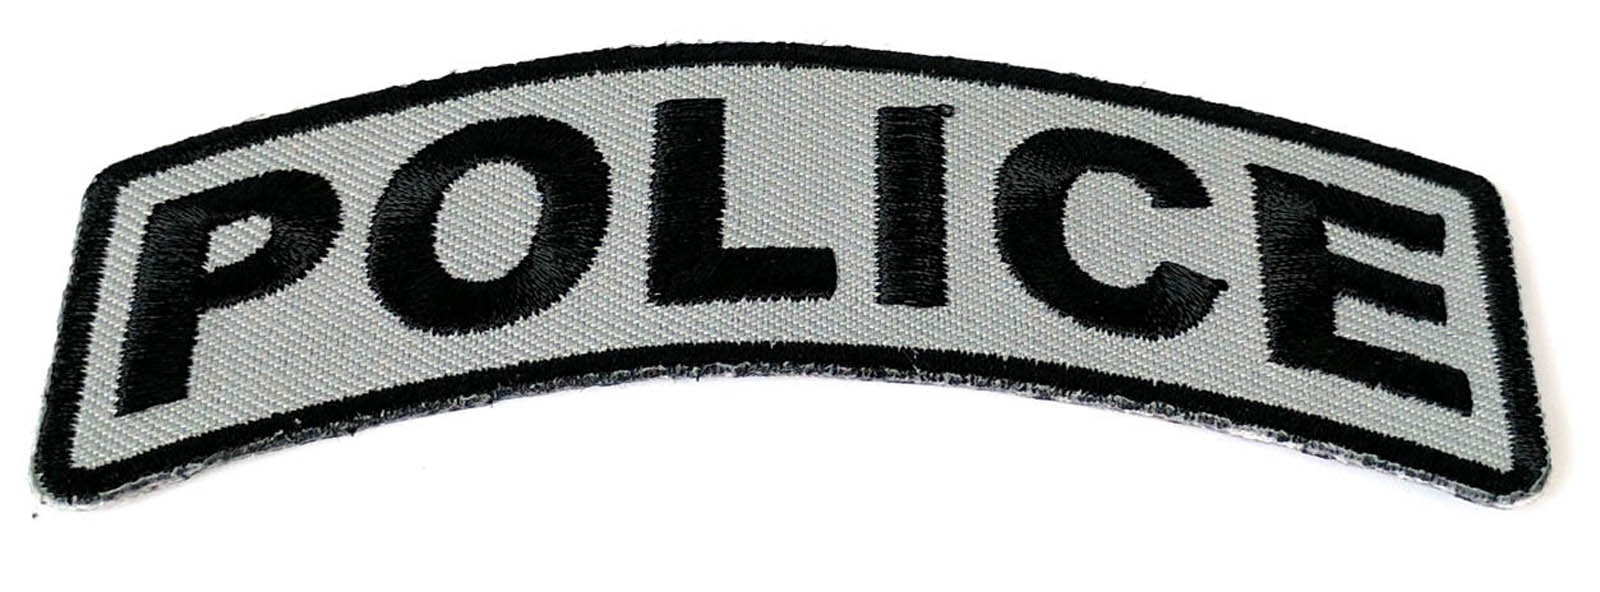 Law Enforcement Patches in all different shapes and colors, Check them Out!